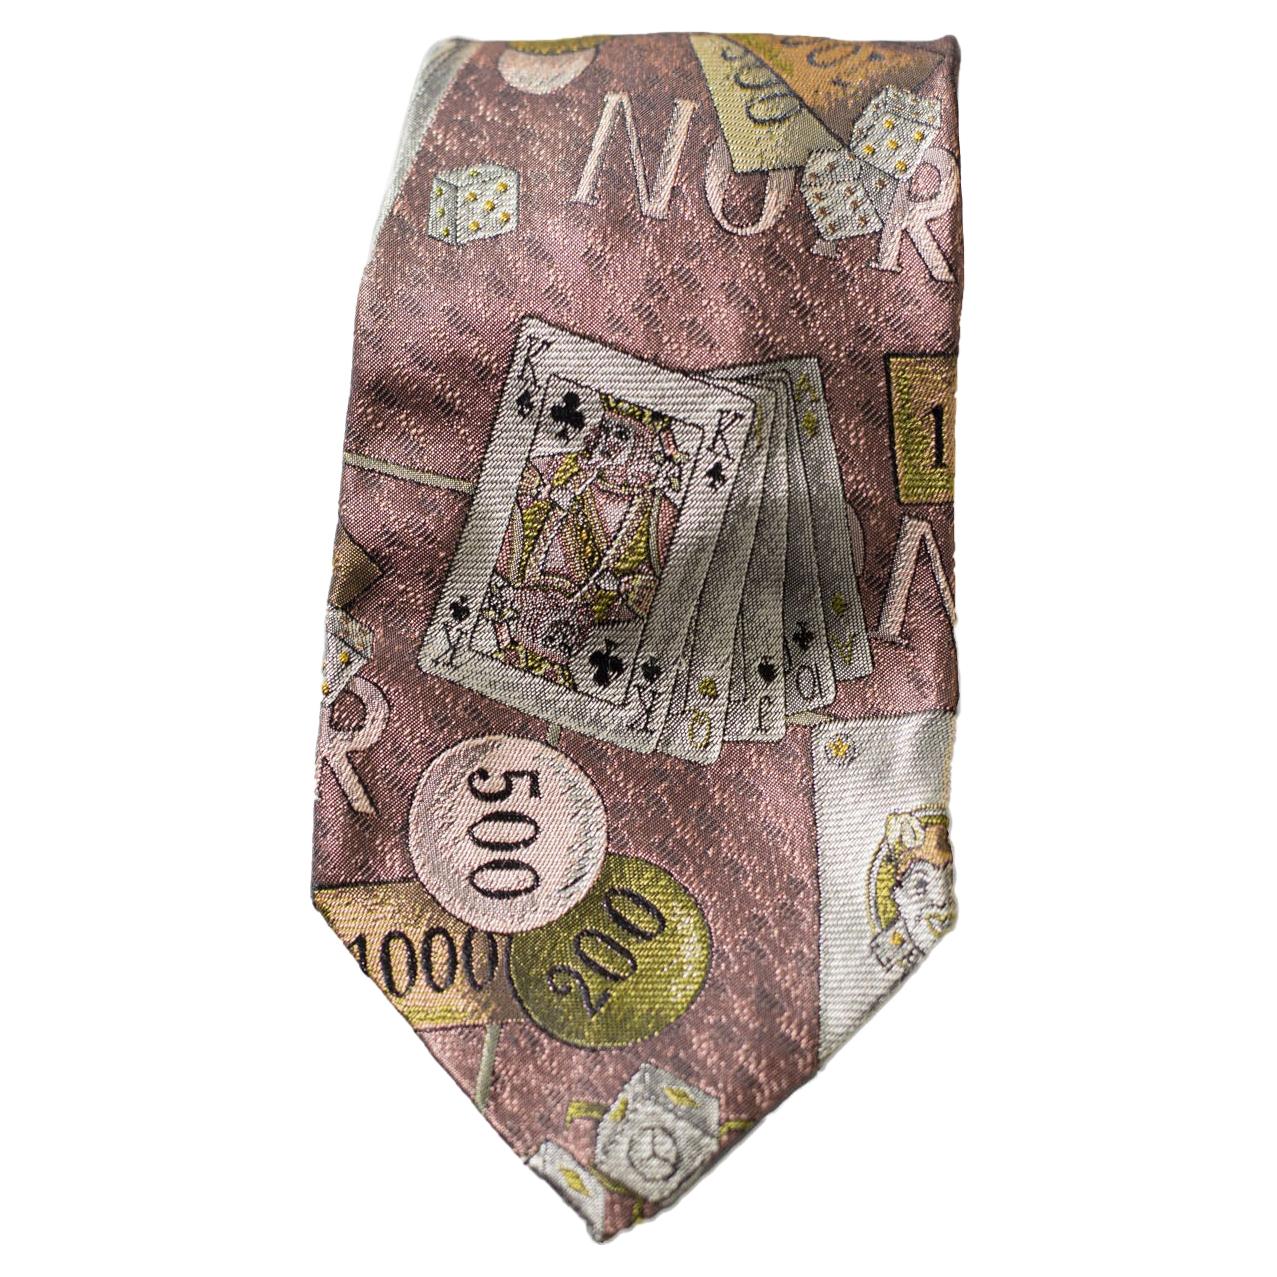 Vintage silk tie with playing cards by Moschino